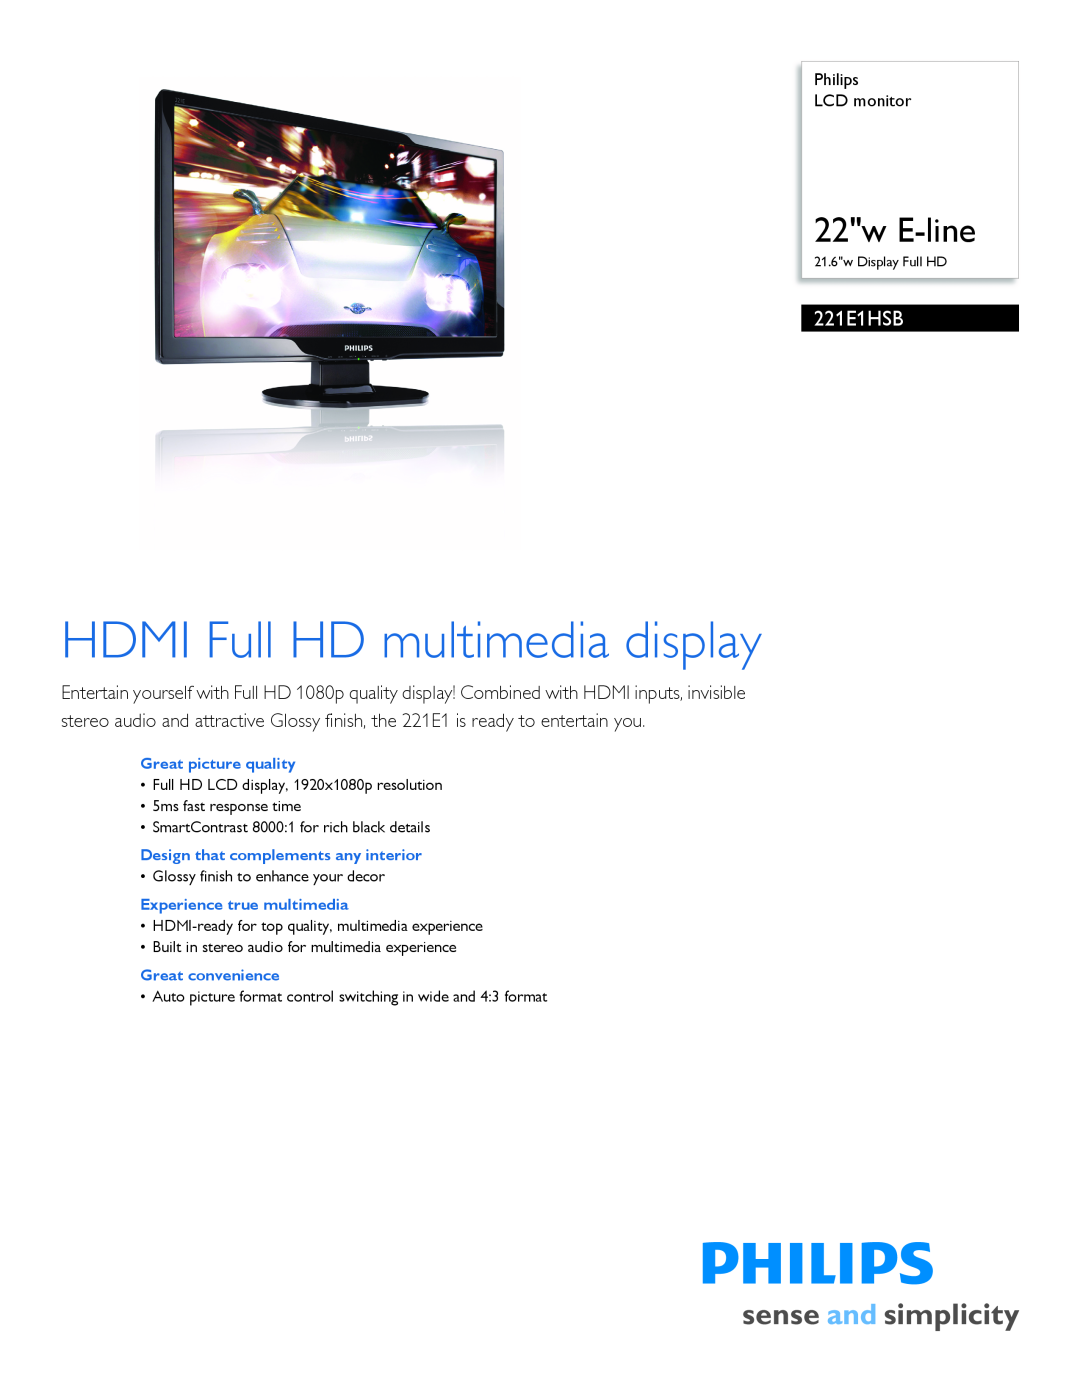 Philips 221E1HSB manual Philips LCD monitor, Great picture quality, Design that complements any interior, 22w E-line 